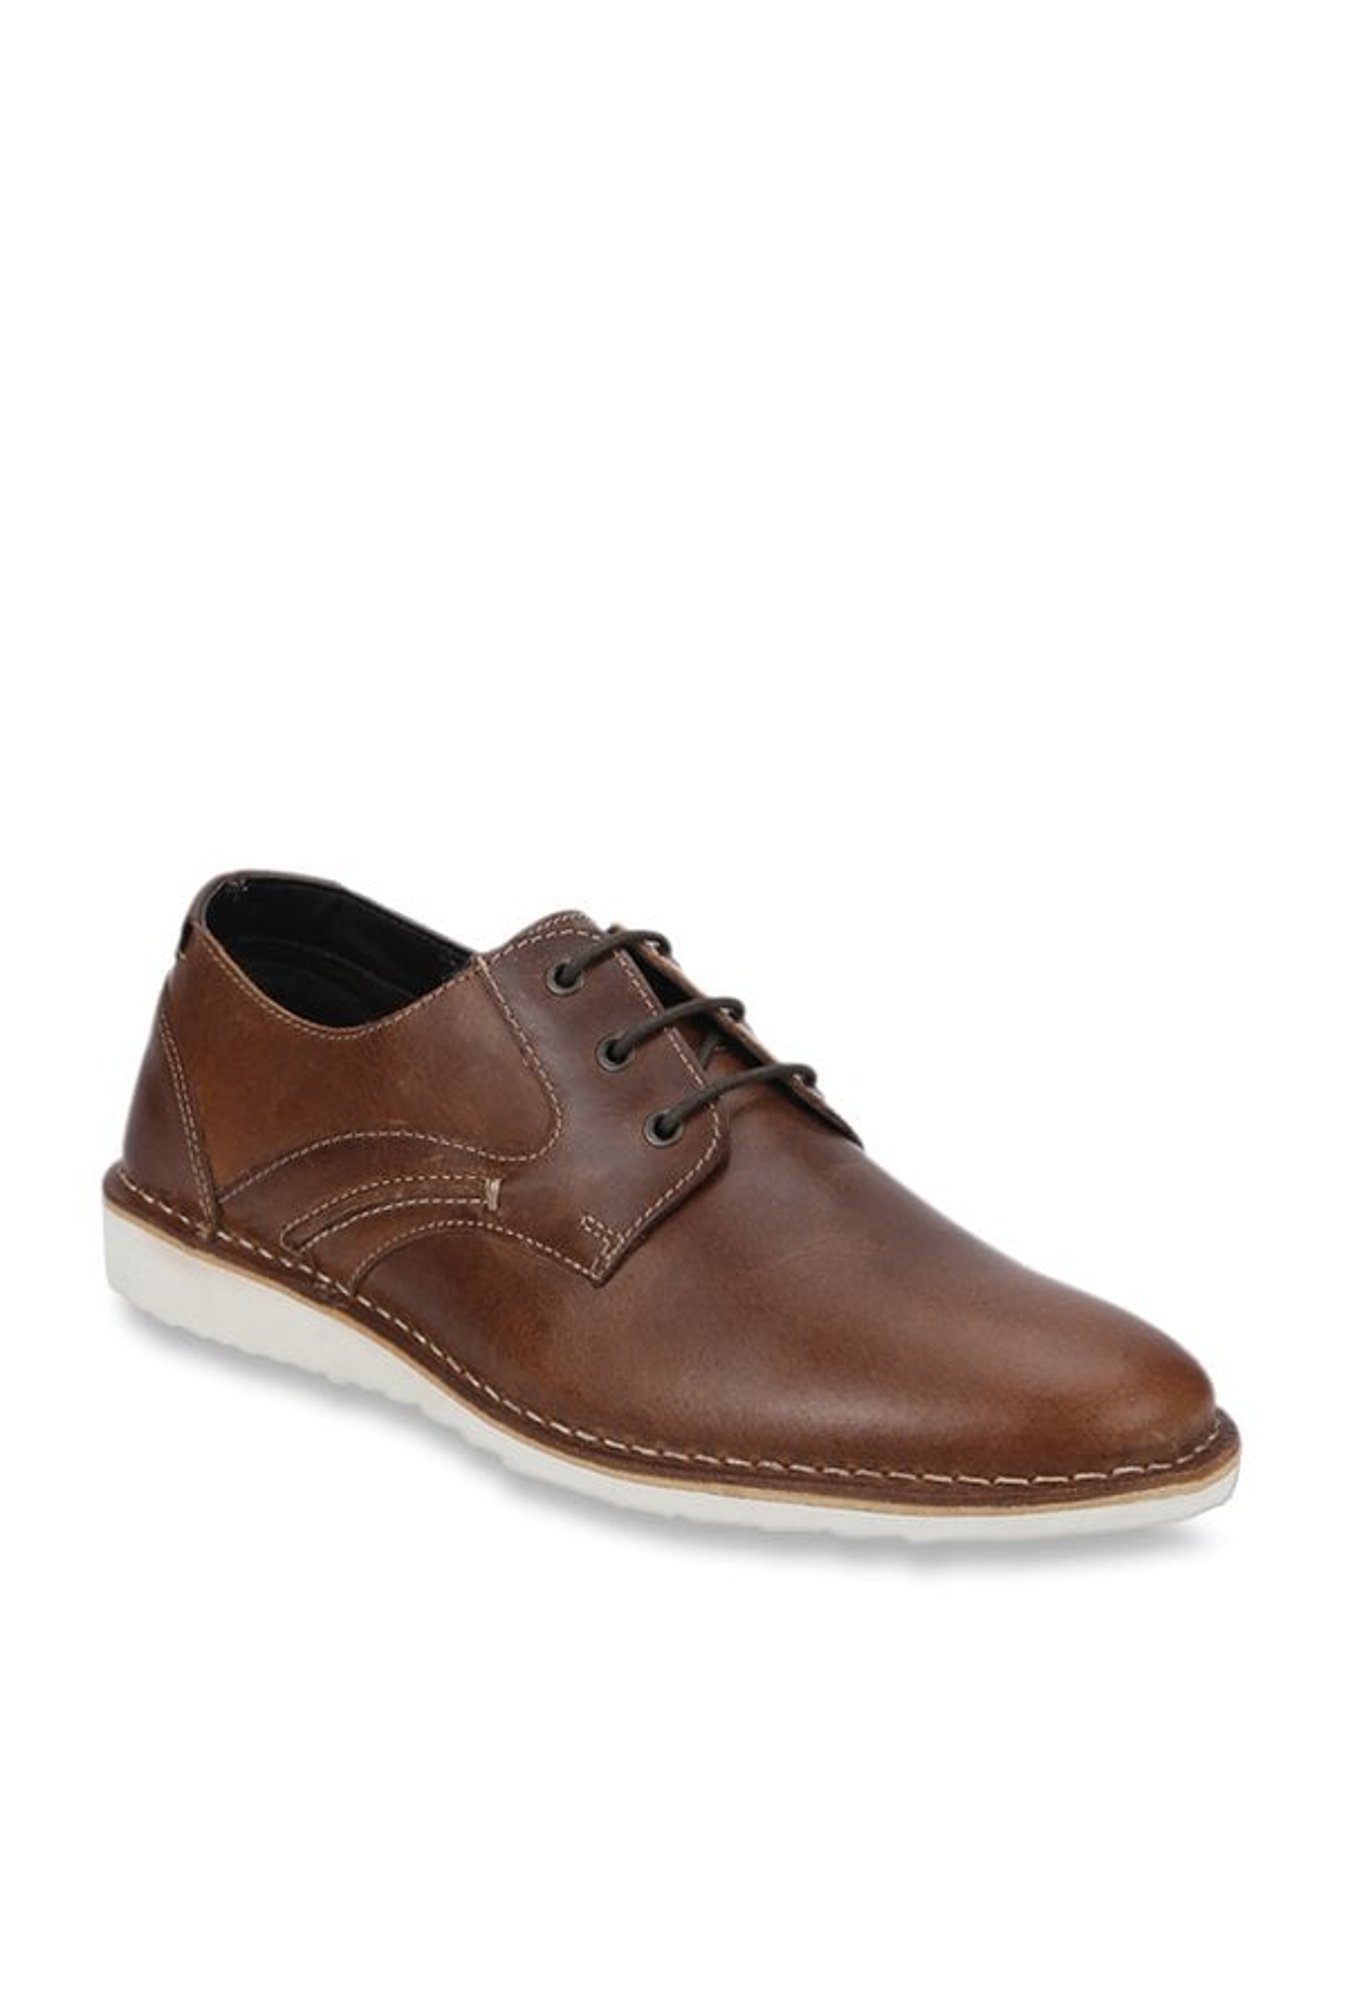 Red Tape Tan Derby Shoes from Red Tape 